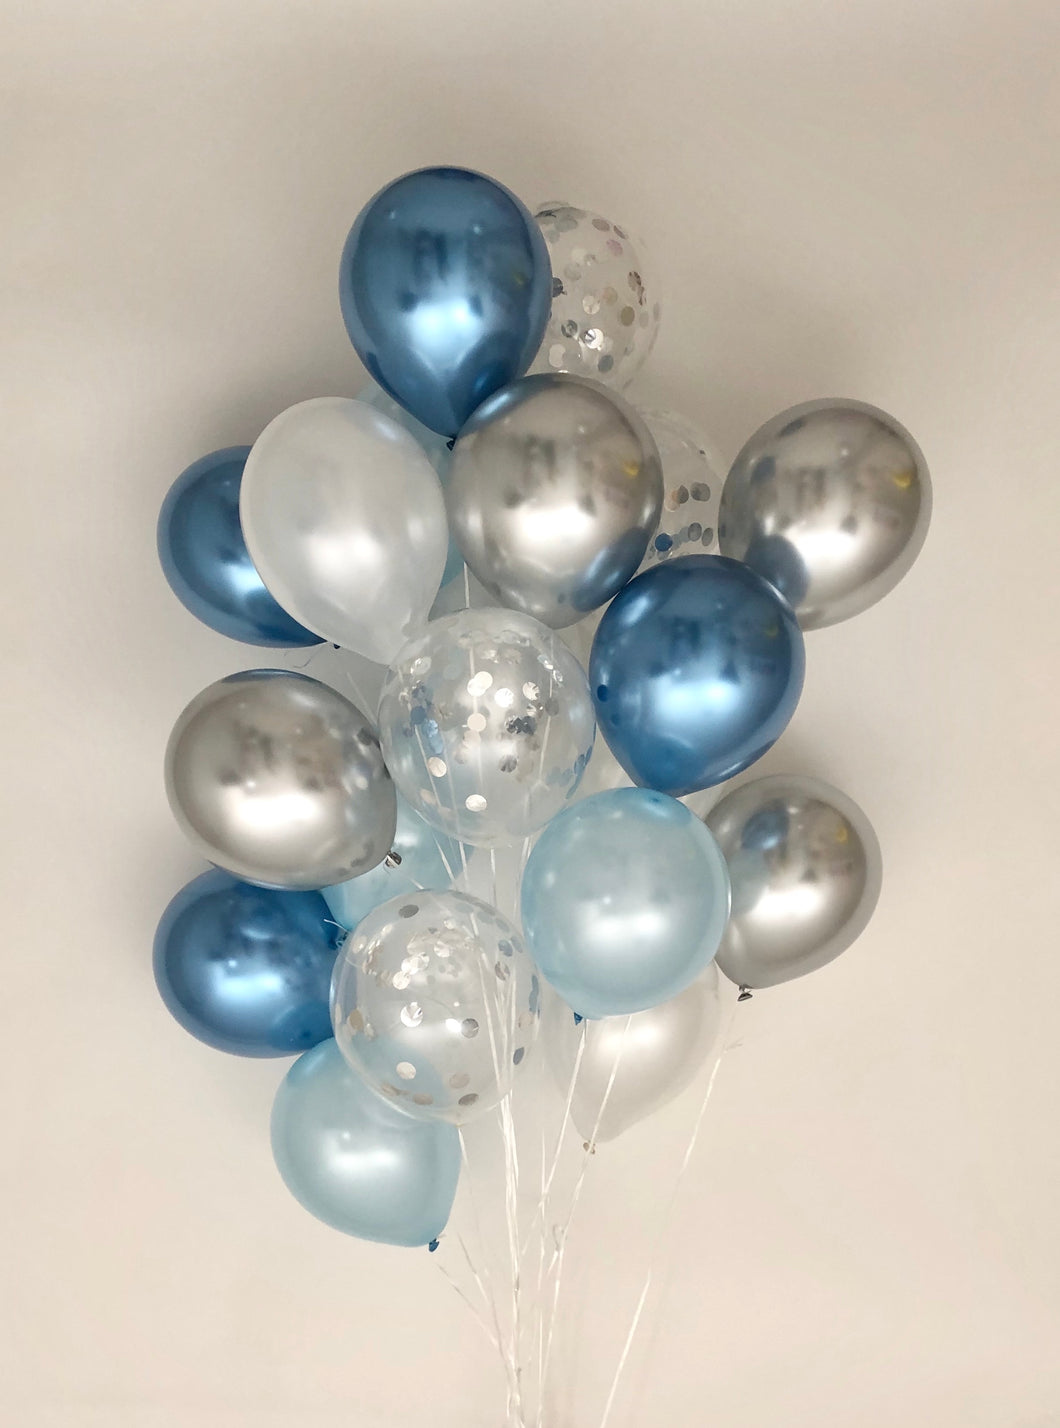 Sweet Moon 20 Piece Latex Balloons Bouquet - Baby Shower, Bridal Shower, Eid, and Ramadan Party Decoration (Metallic Blue)